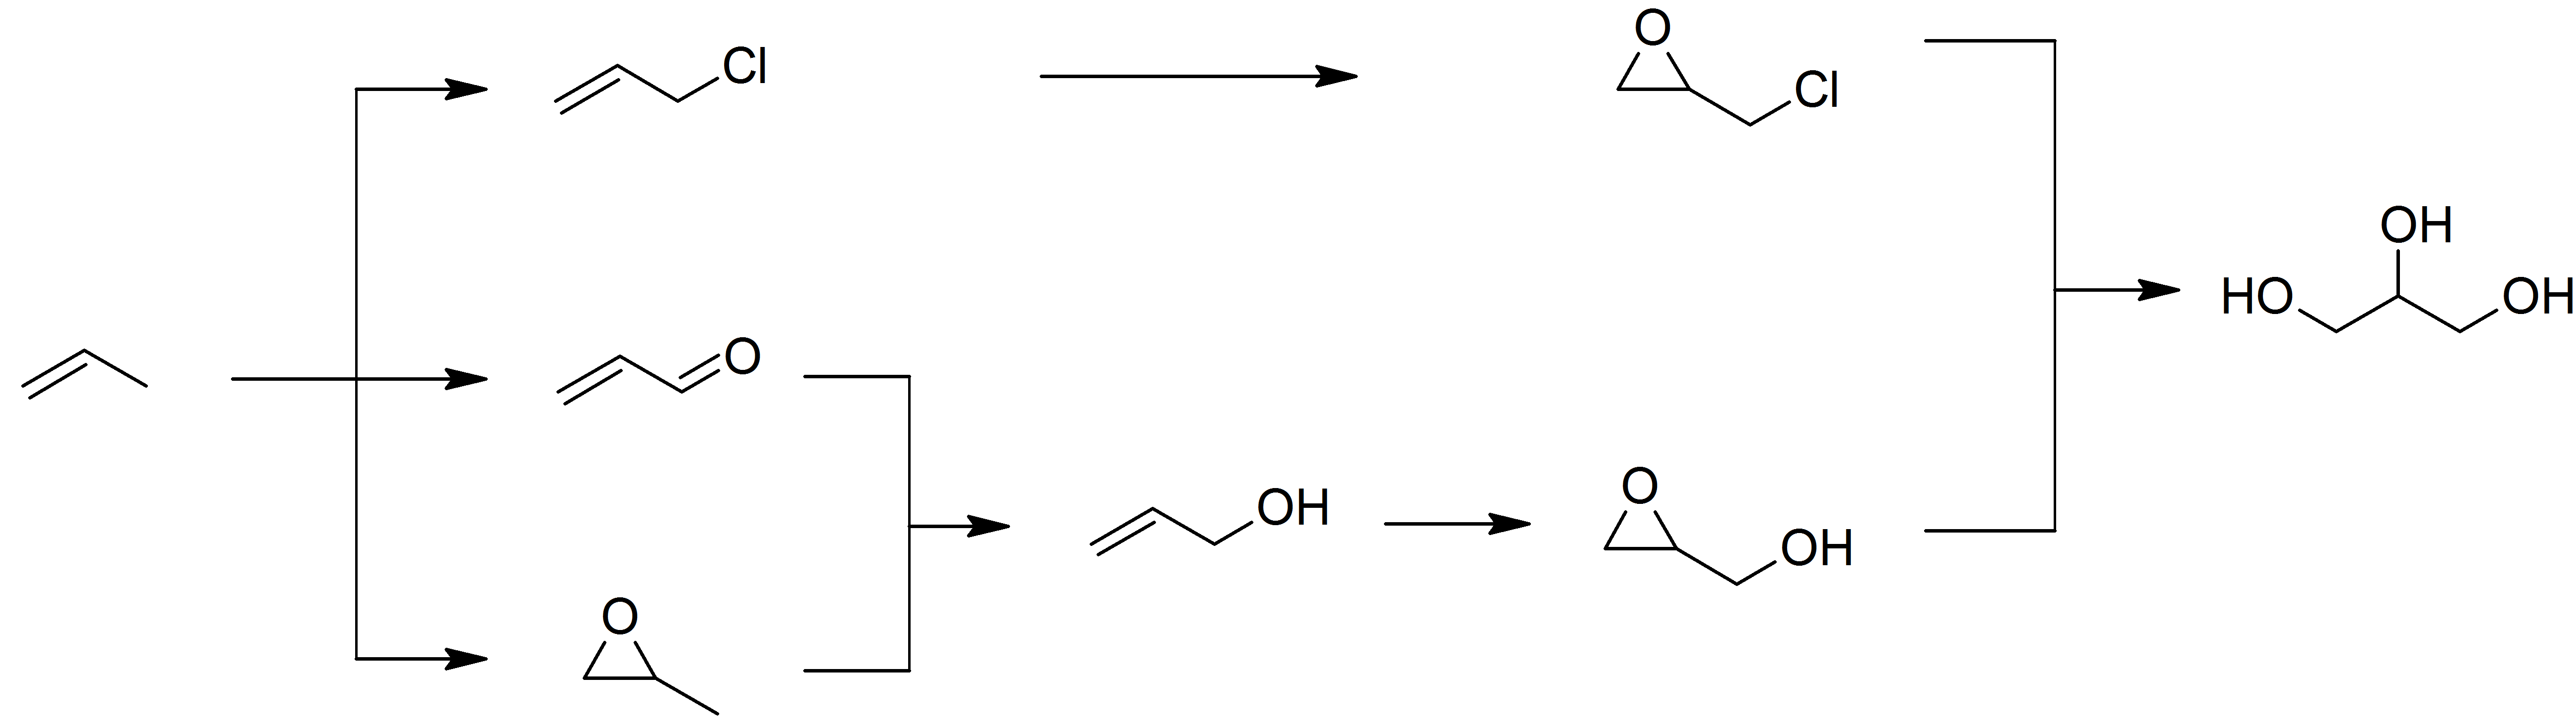 fatty acids chemistry synthesis and applications